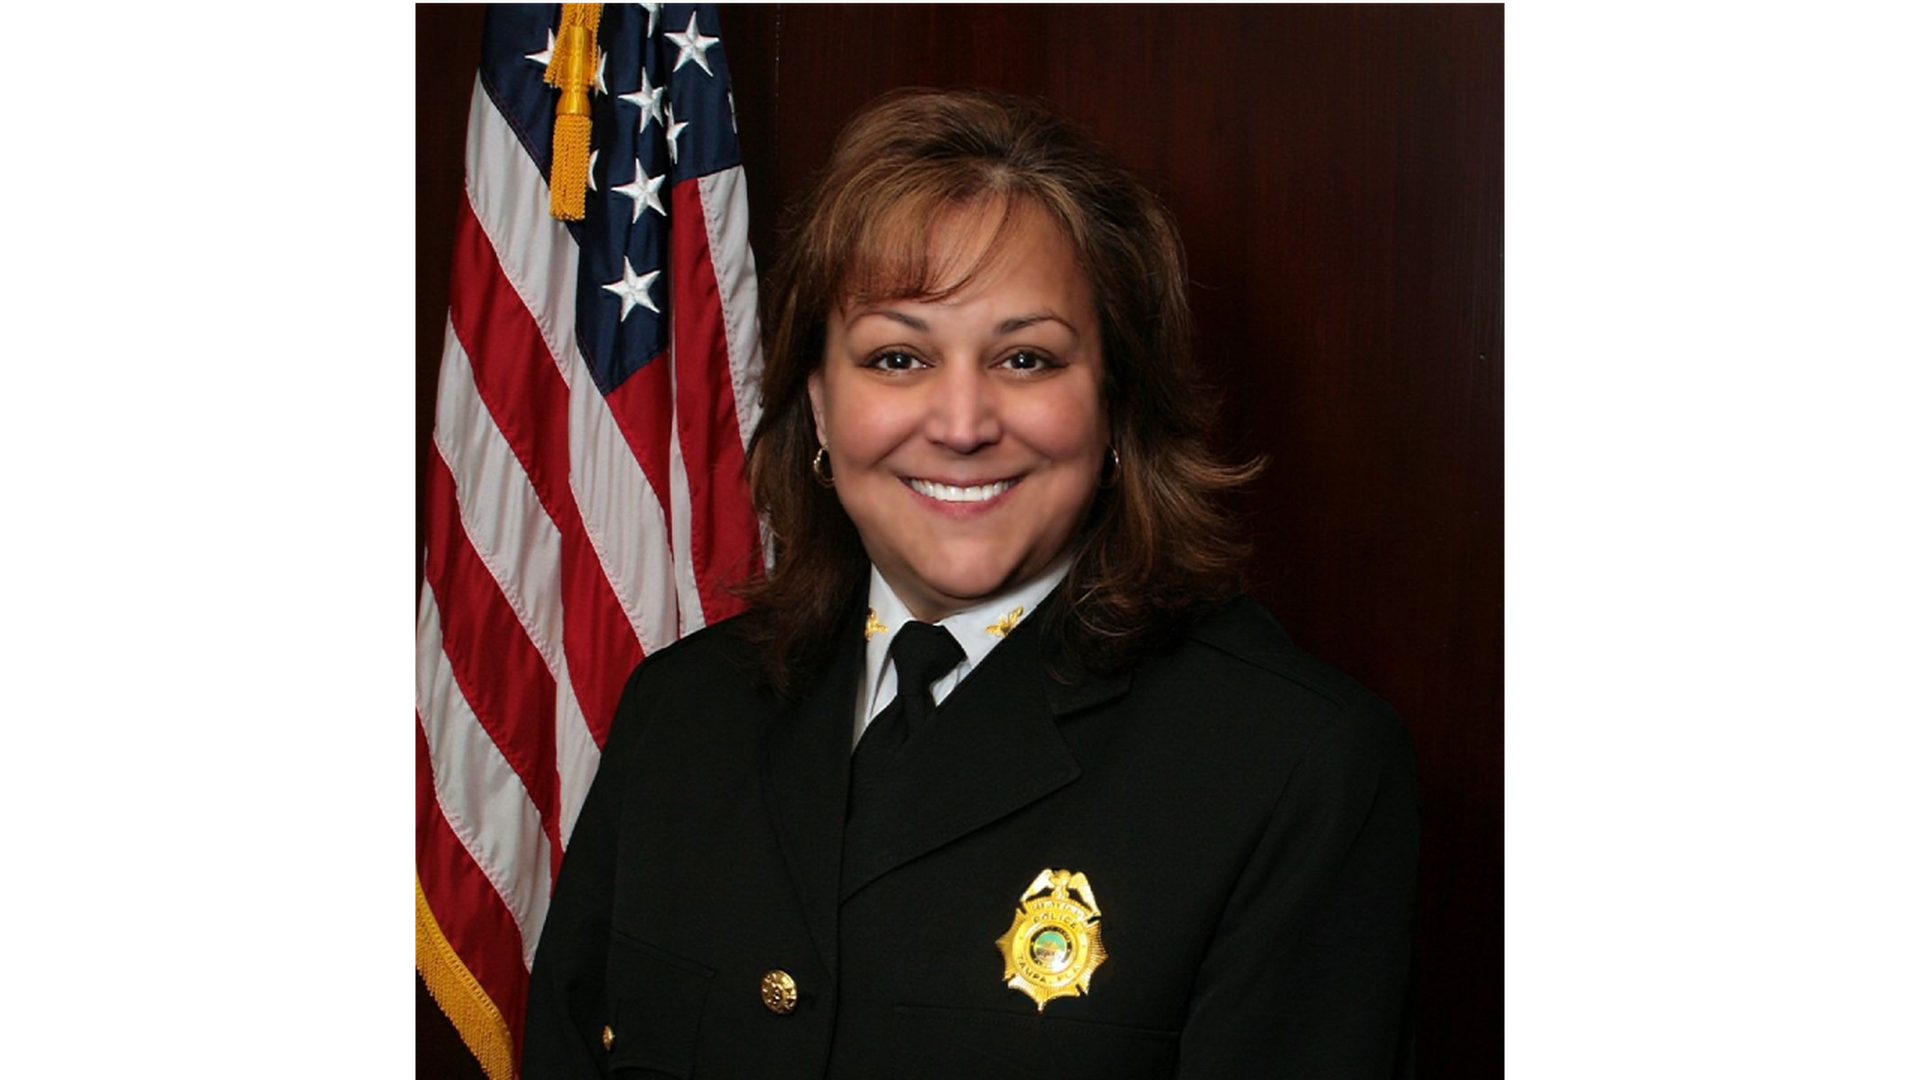 A headshot of new Tampa police chief Mary O'Connor